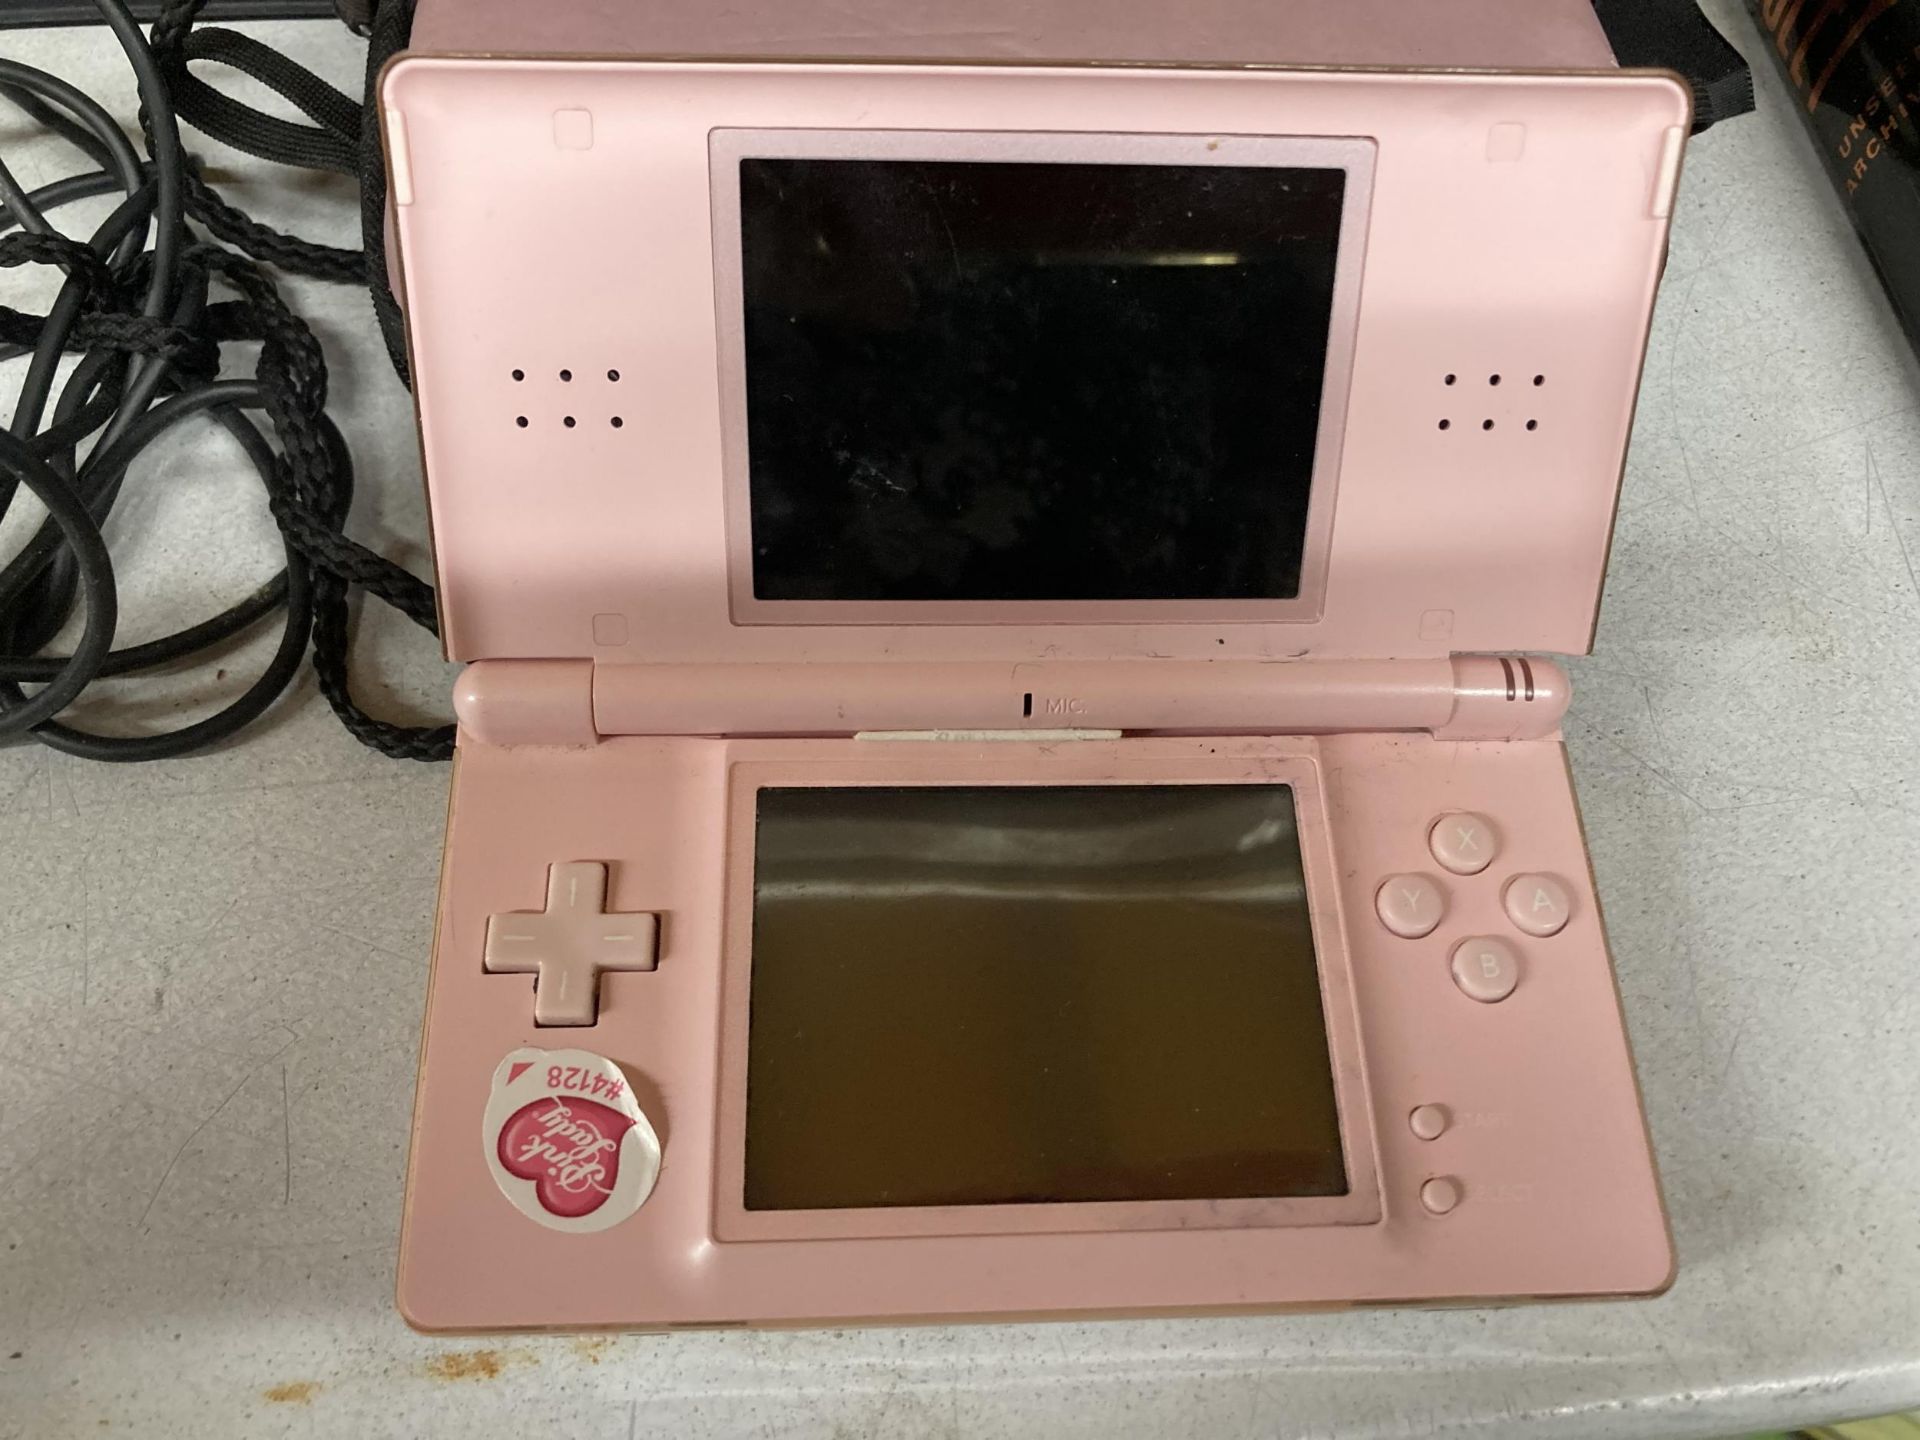 APINK NINTENDO DS LITE WITH CHARGER AND CASE, PHOTO ALBUM AND STATIONERY ITEMS - Image 3 of 3